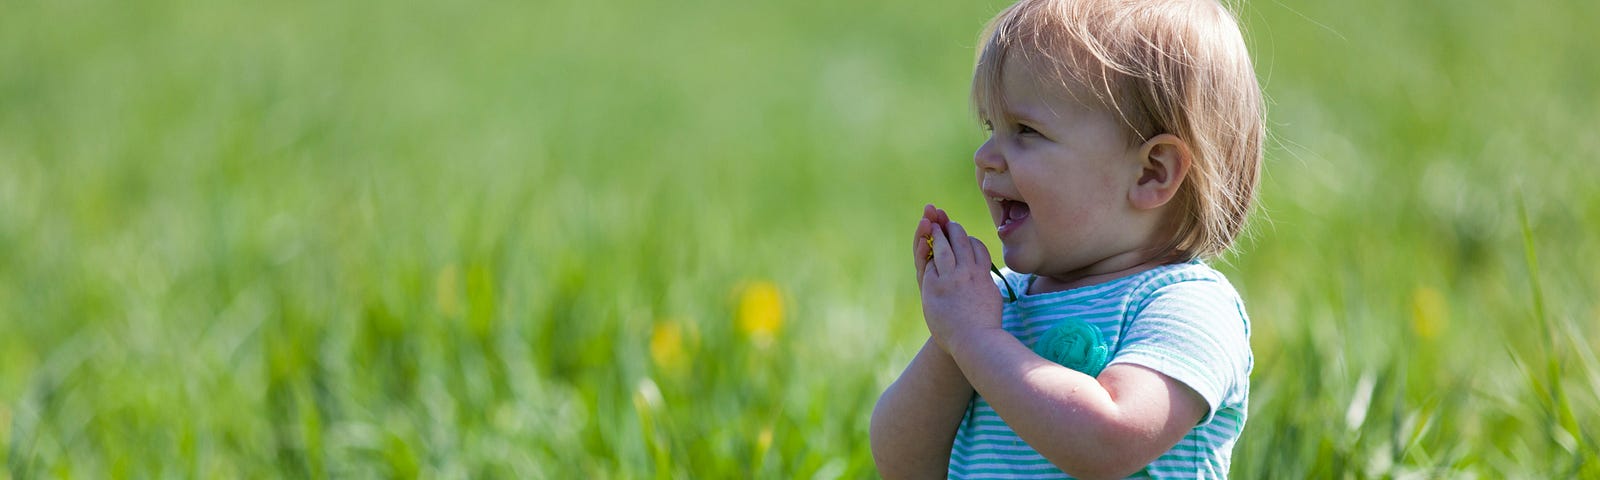 Young child in a grassy field laughing and clapping